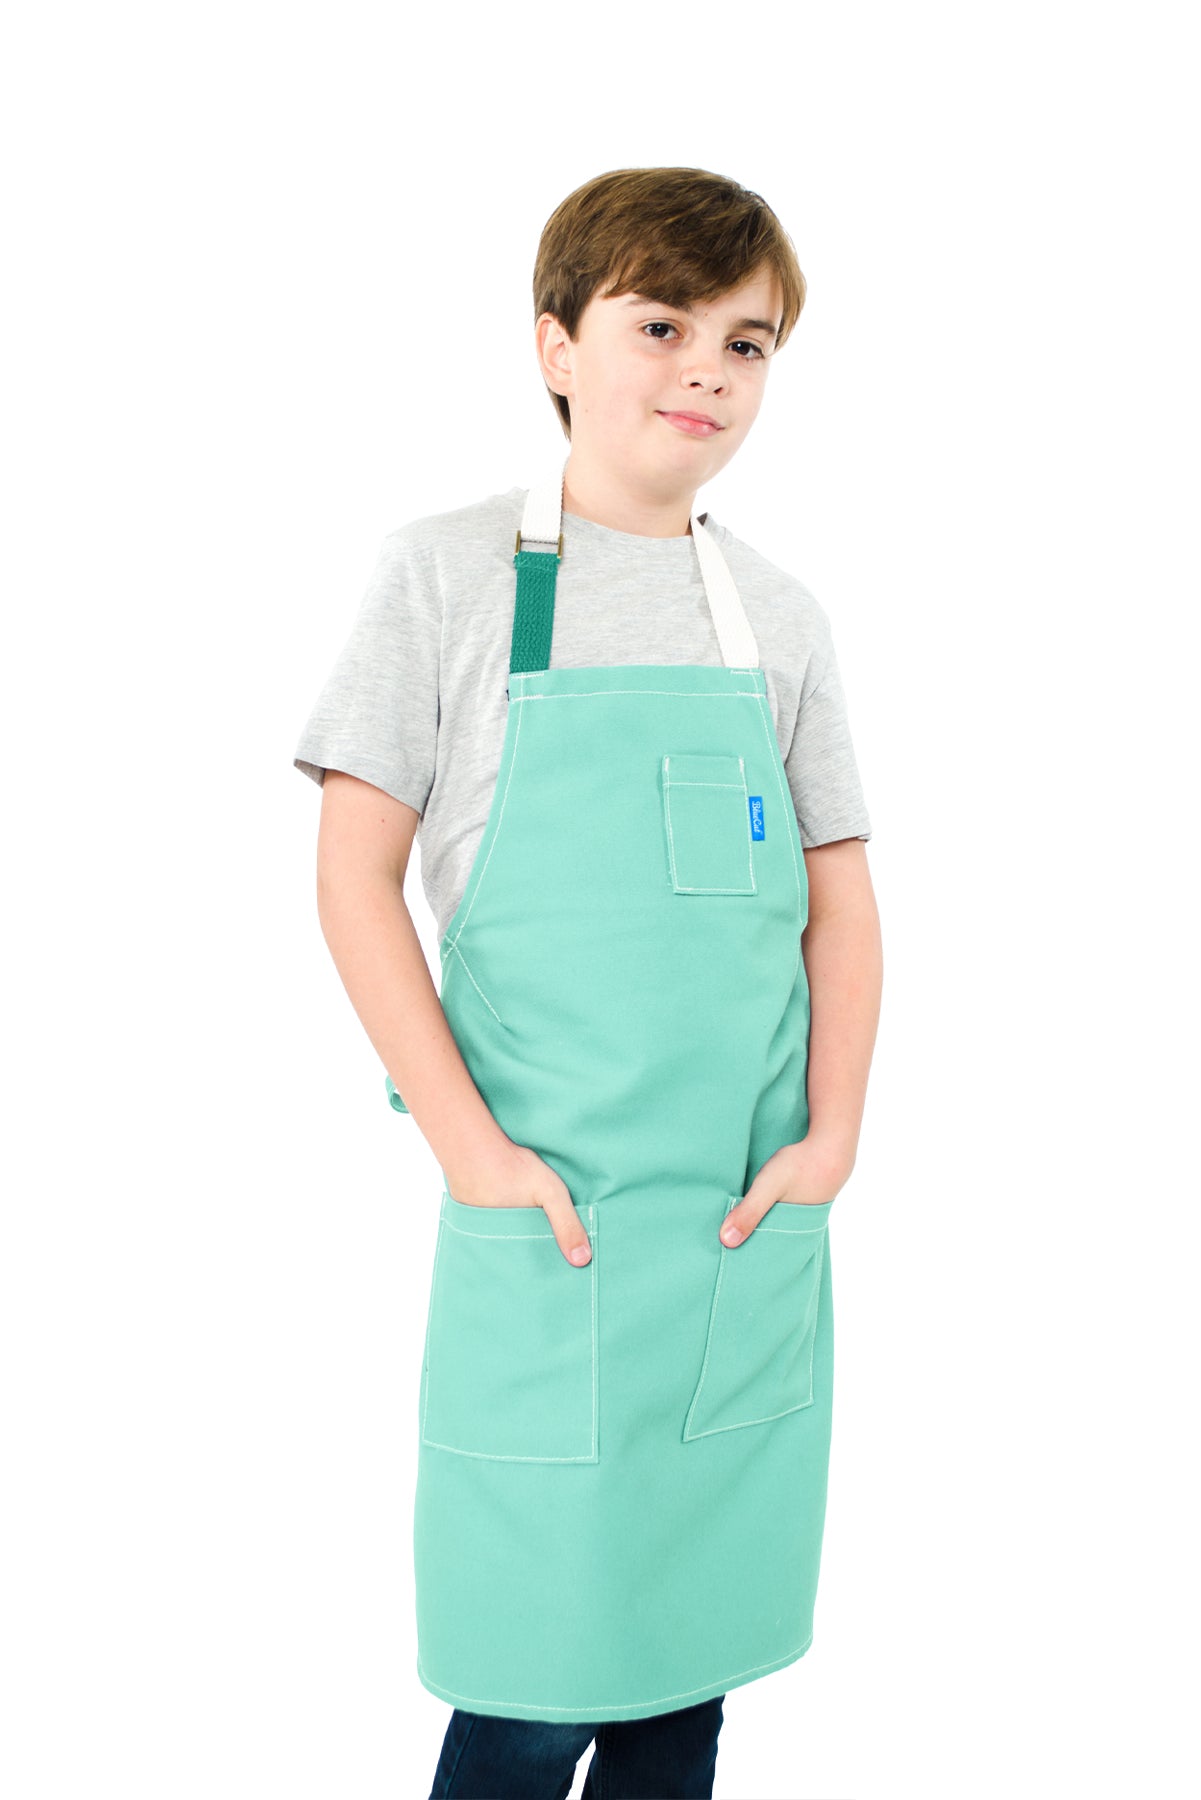 Lucca Kids Apron 8-12 Years Mint